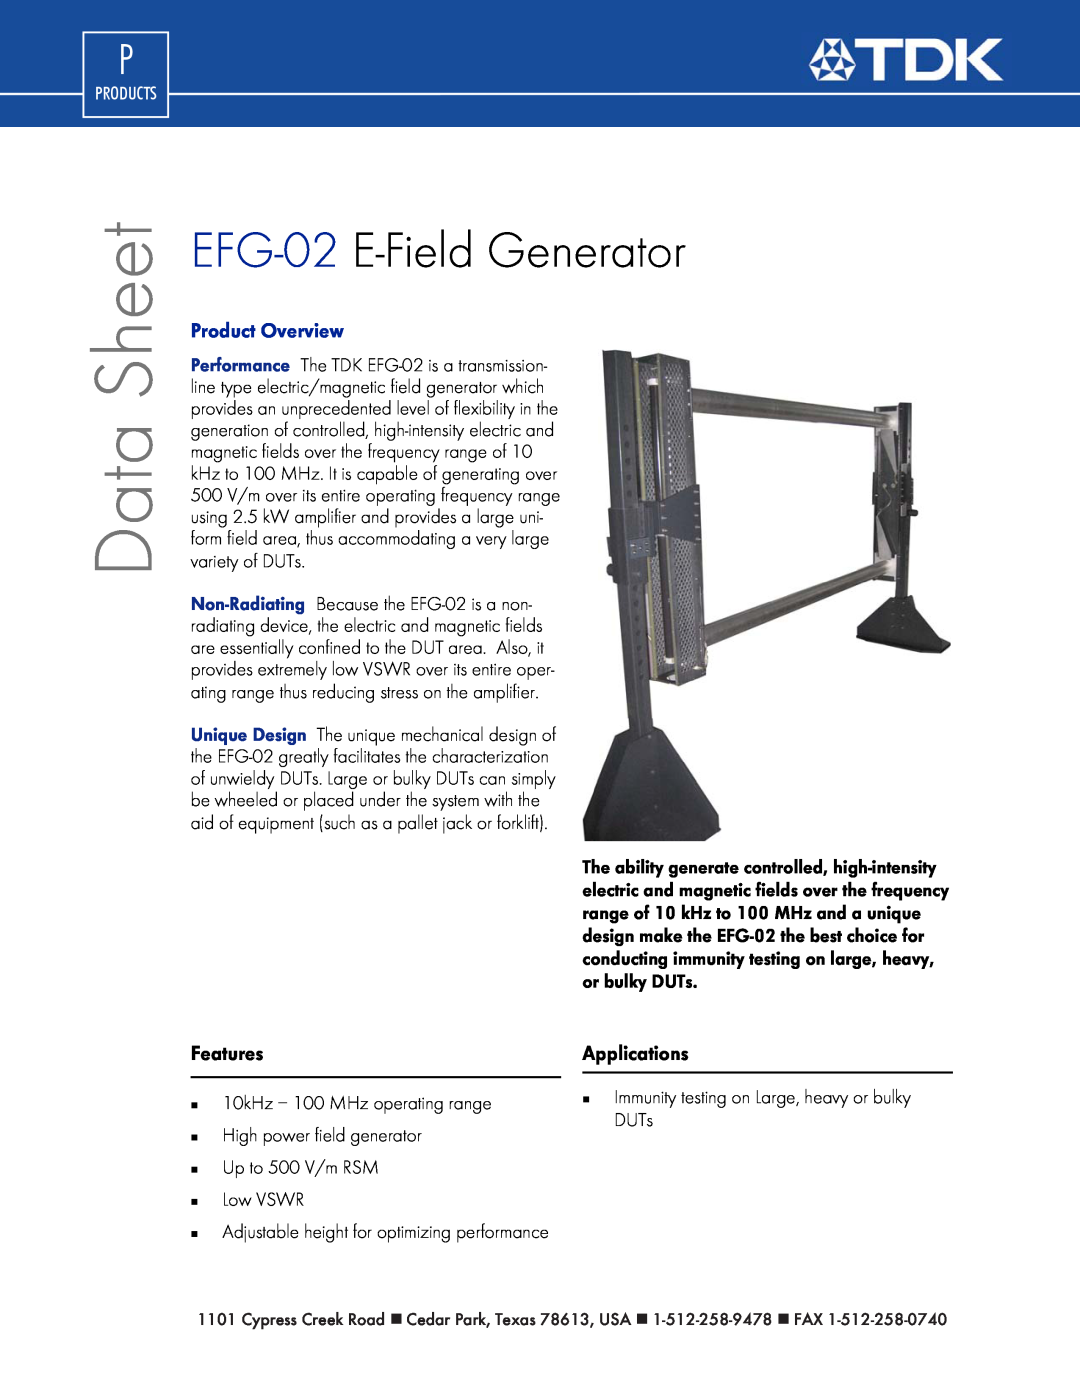 TDK manual EFG-02 E-FieldGenerator, Features, Applications, Data Sheet, Product Overview, Products 